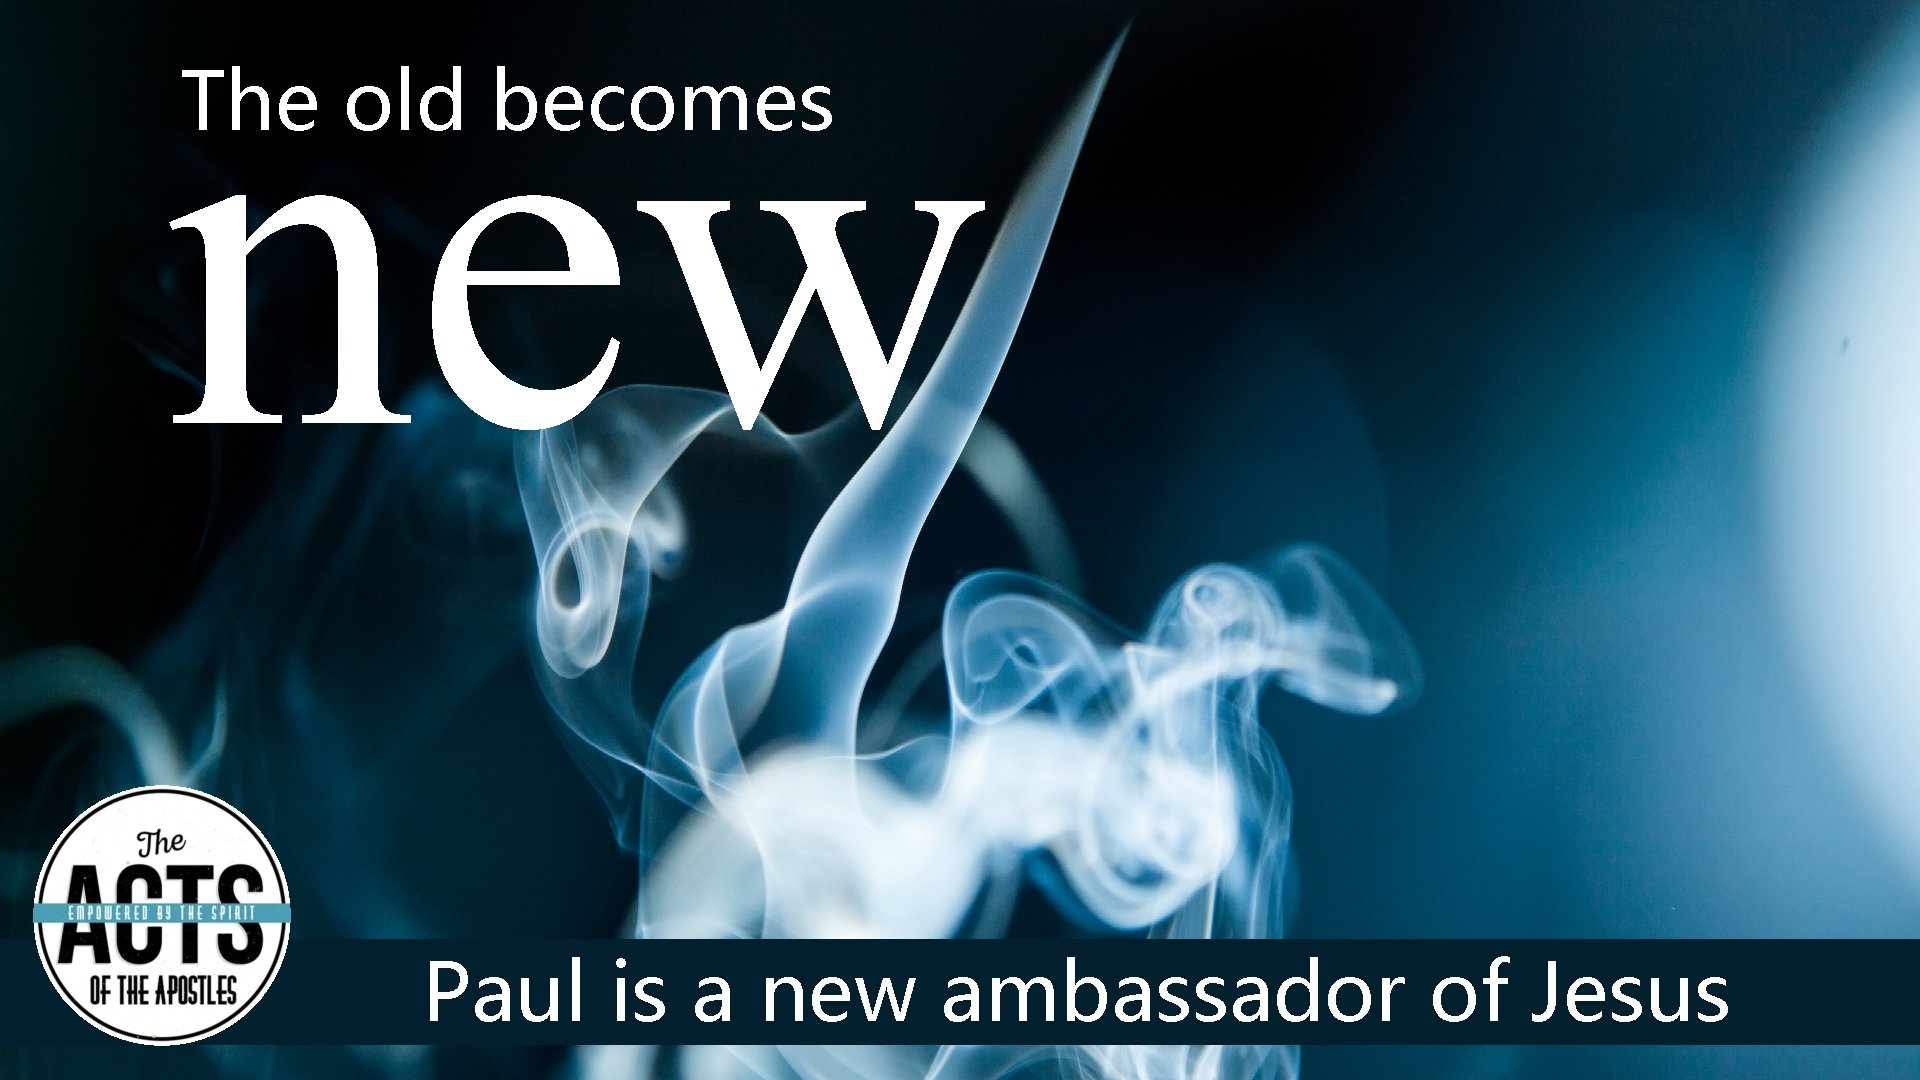 new The old becomes Paul is a new ambassador of Jesus 